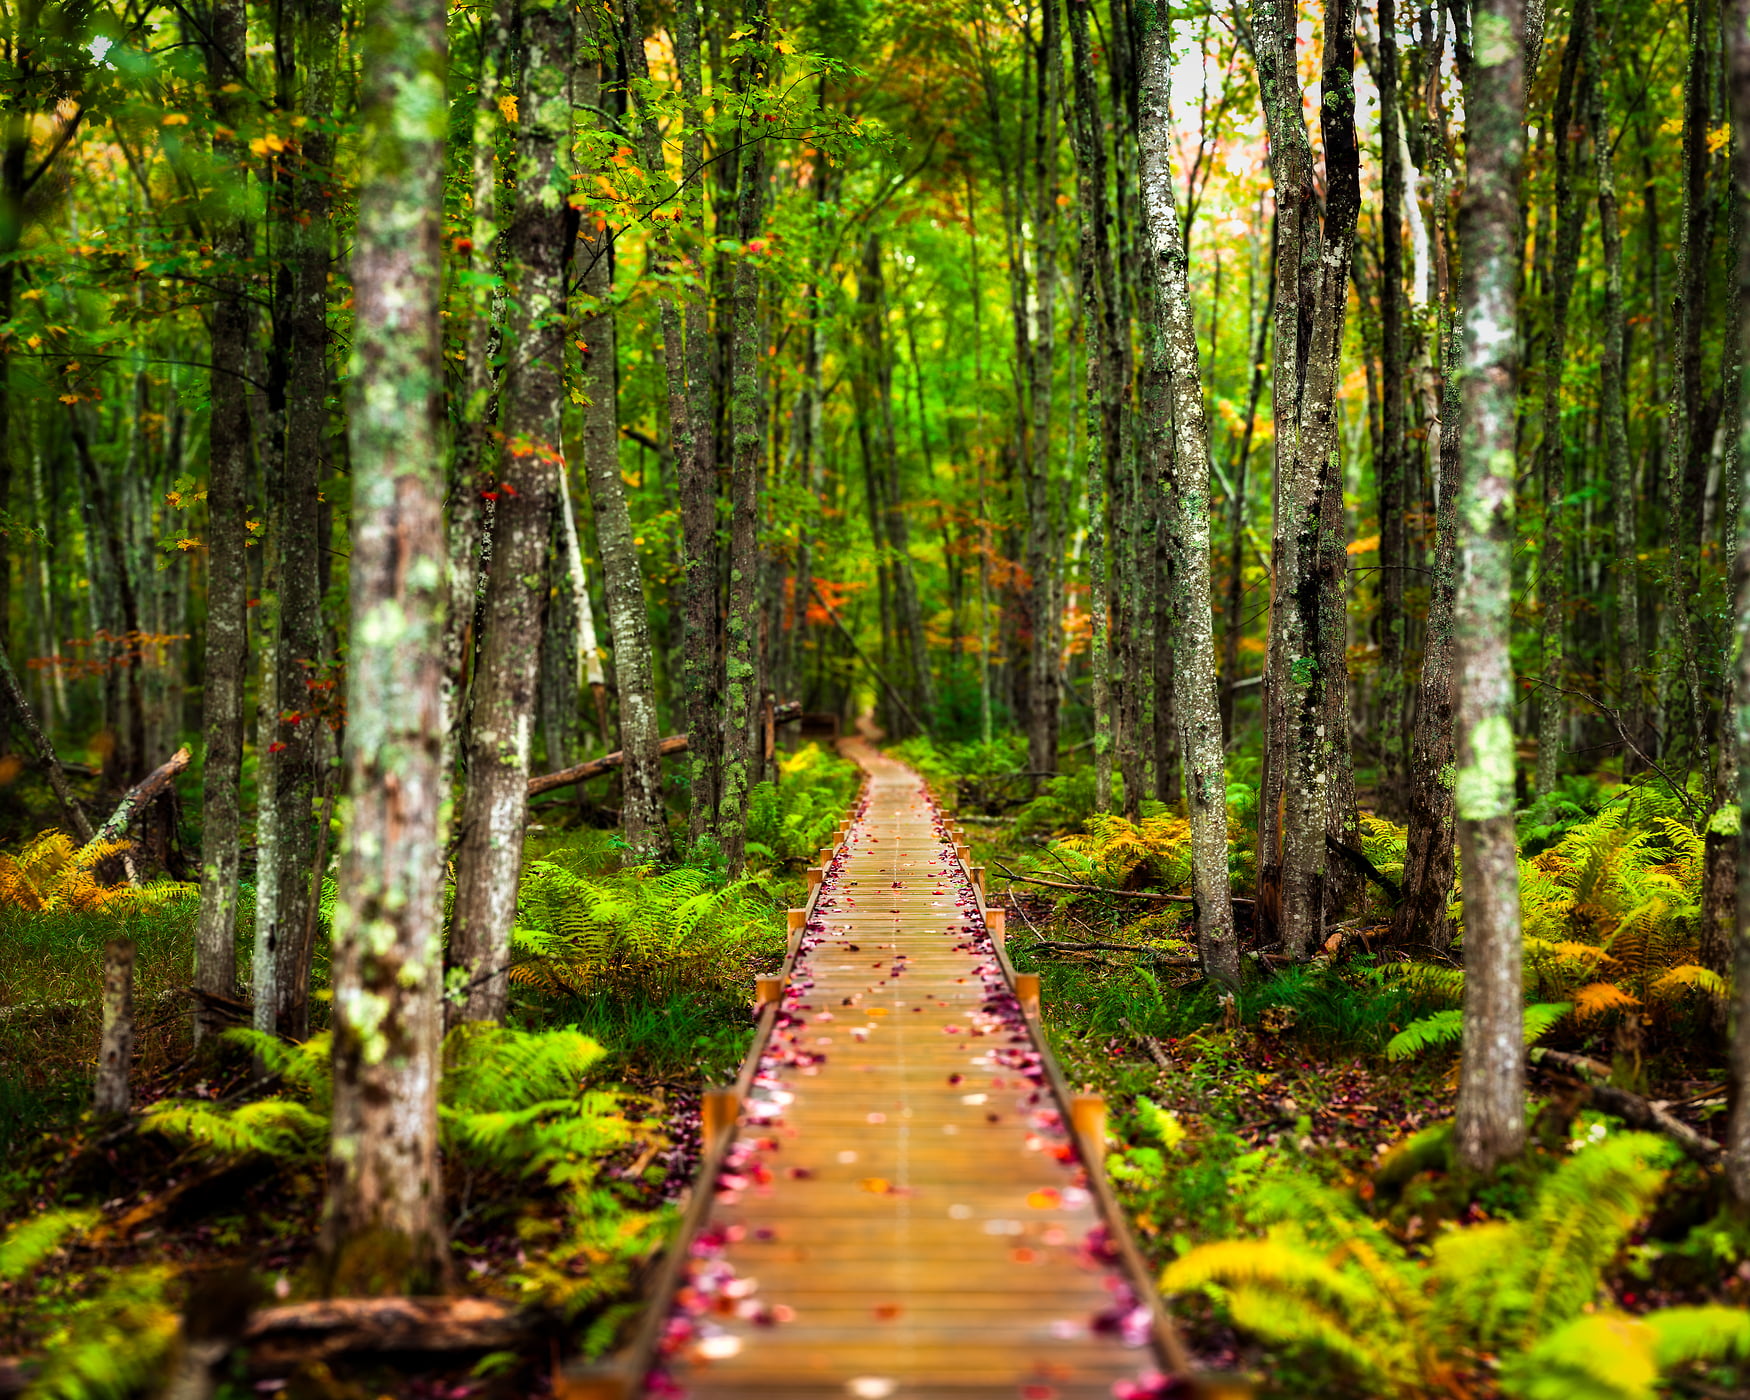 191 megapixels! A very high resolution, large-format VAST photo of leaves on a boardwalk in a forest in nature; fine art photograph created by Aaron Priest in Acadia National Park, Maine.